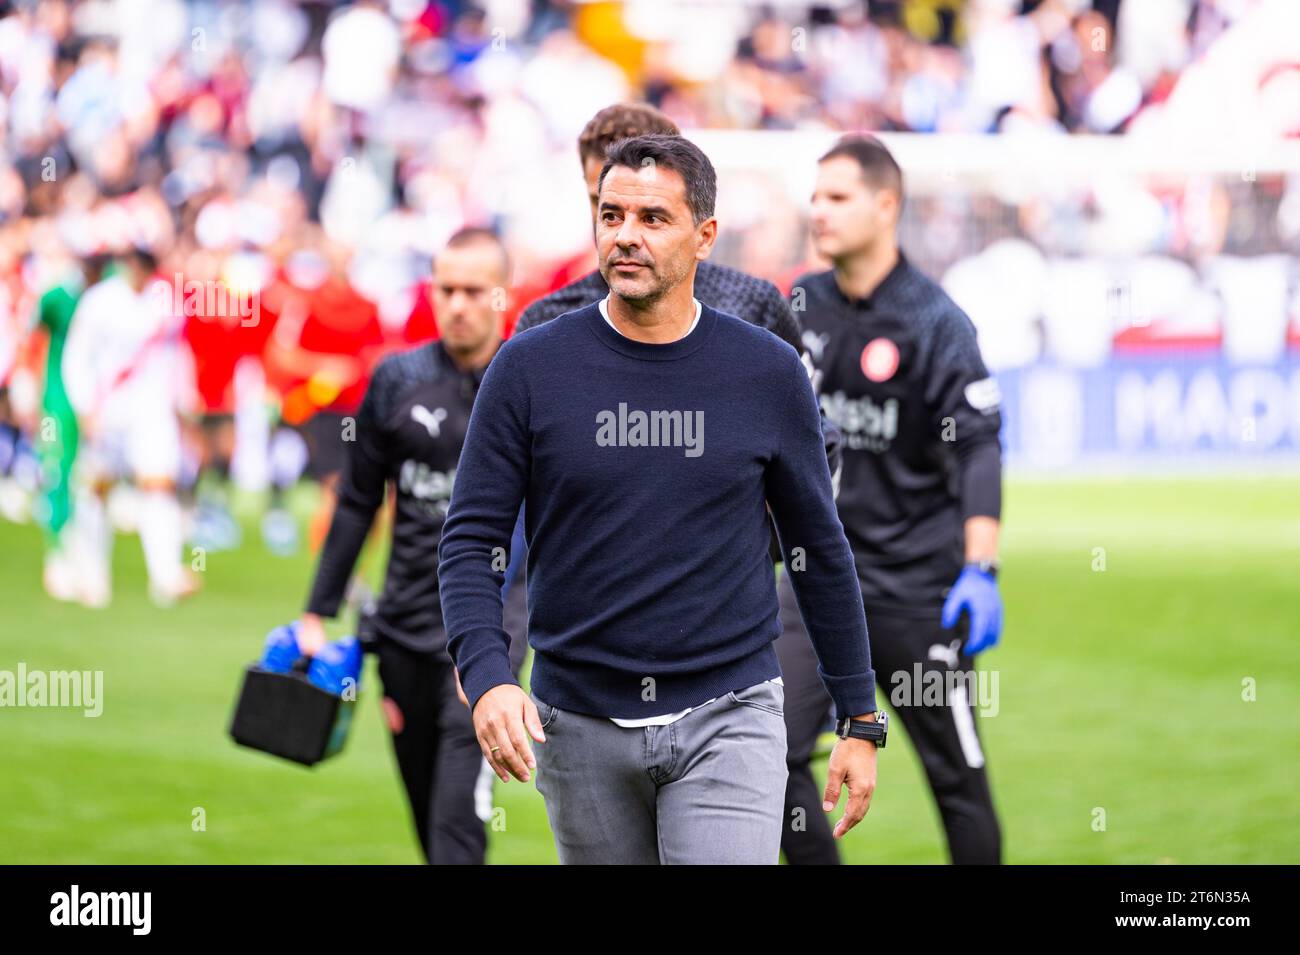 Miguel Angel Sanchez Munoz, better known as Michel, historical figure of Rayo Vallecano and current coach of Girona, receives a tribute from Rayo Vallecano fans before the La Liga EA Sports 2022/23 football match between Rayo Vallecano vs Girona at Estadio de Vallecas in Madrid, Spain. Stock Photo